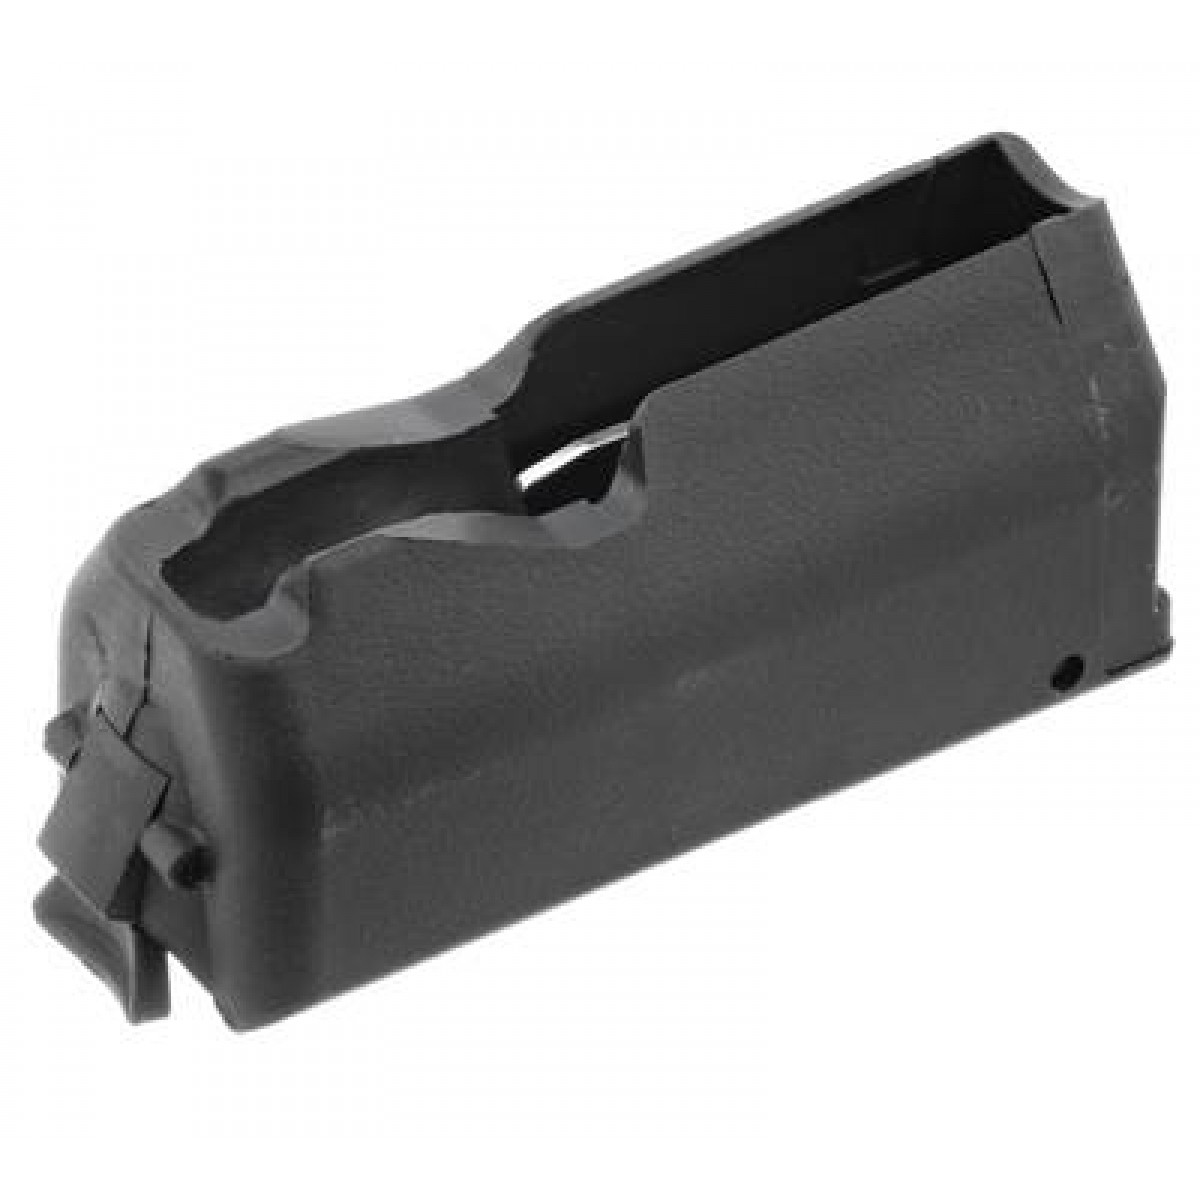 Ruger 90440 Rifle Magazine for sale online 